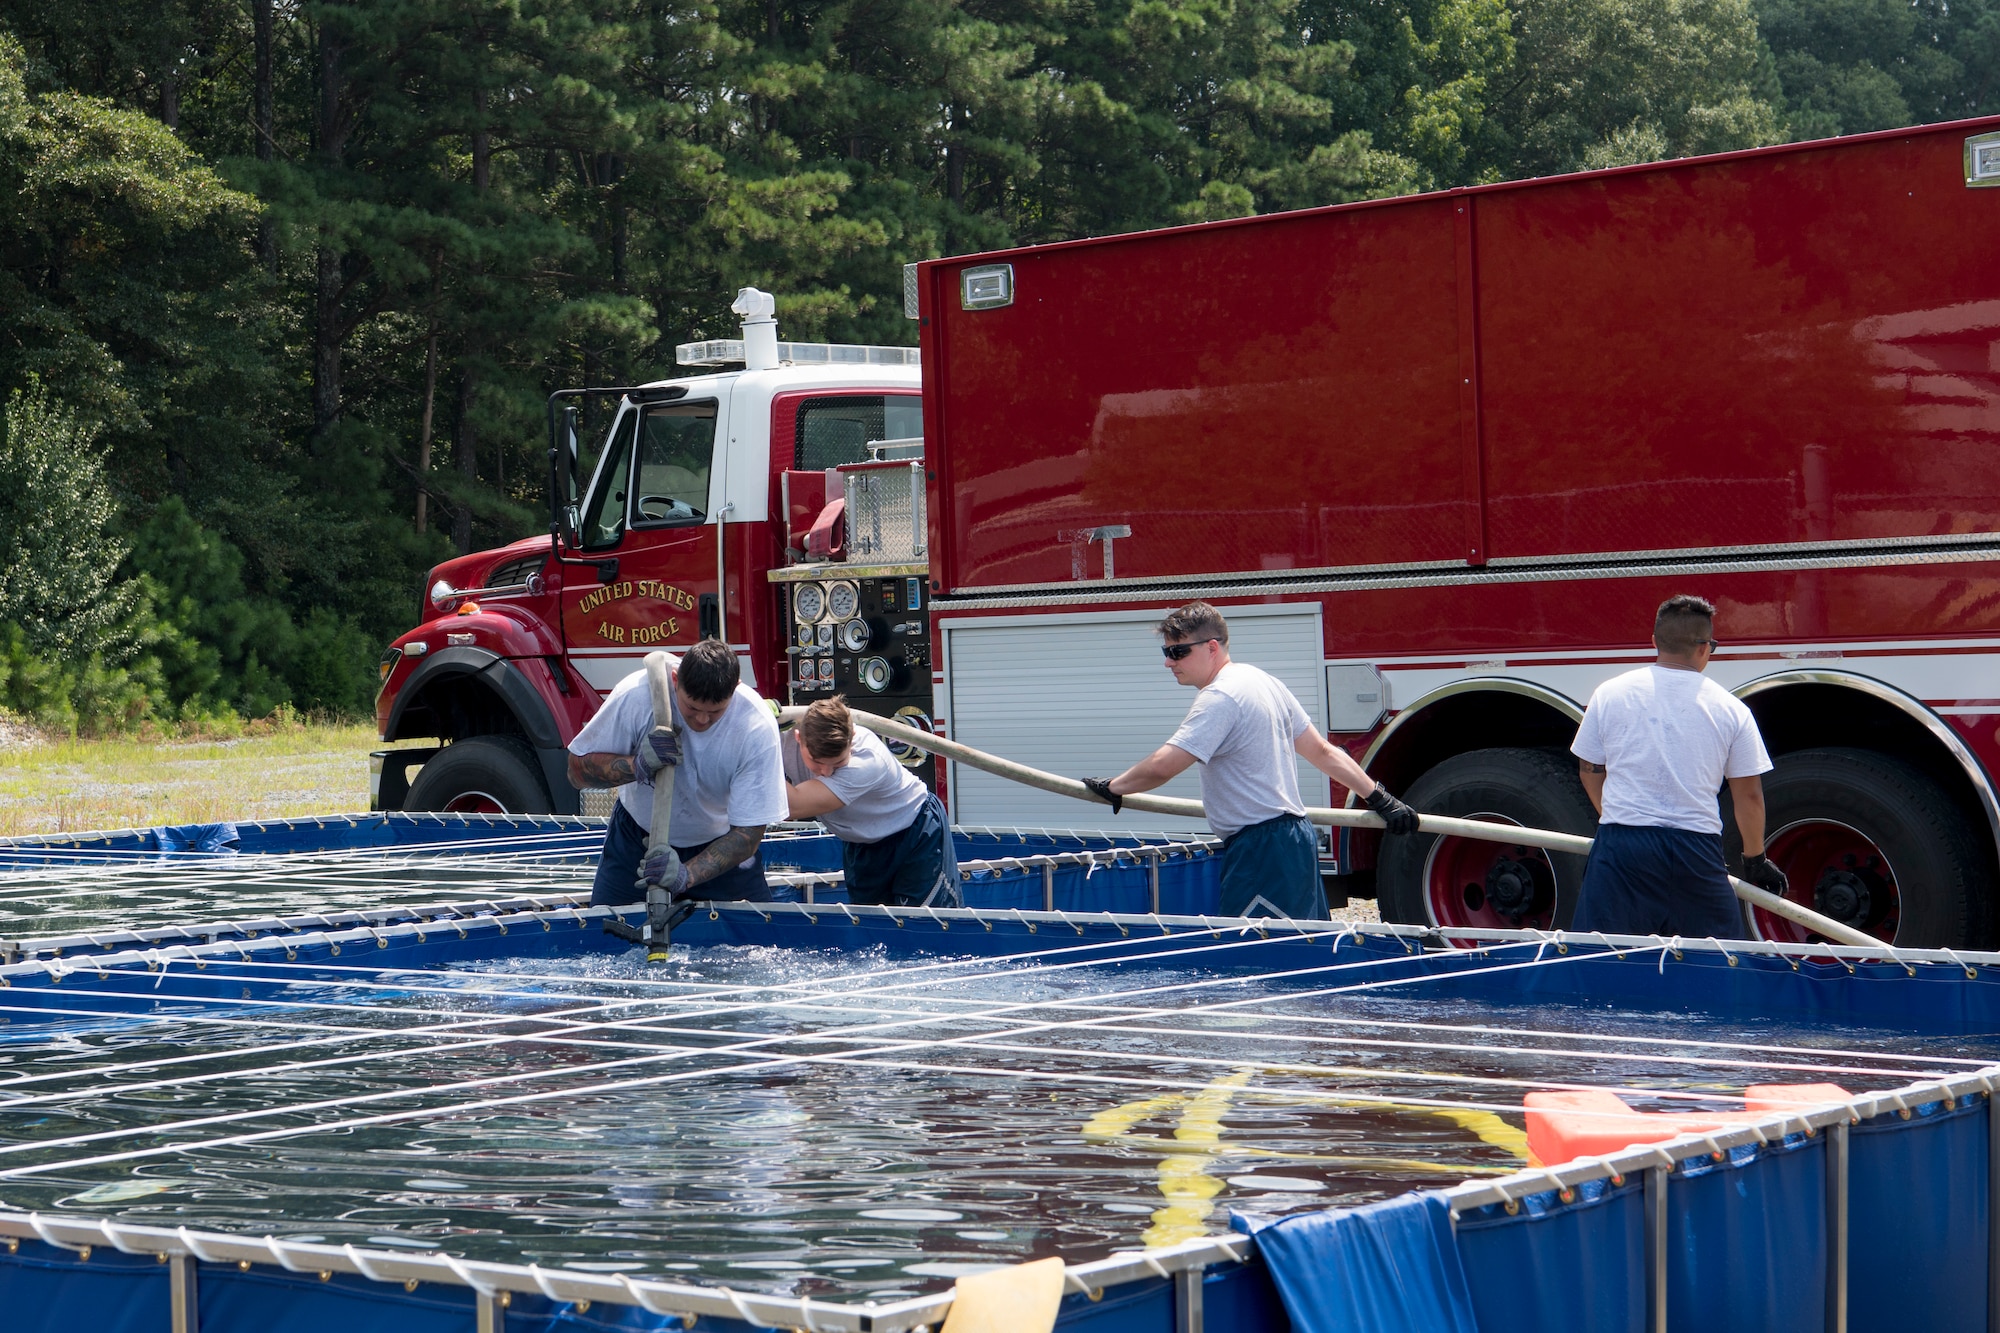 U.S. Air Force Reserve firefighters pump water into their trucks in preparation for their next simulated fire training event during Patriot Warrior at Dobbins Air Reserve Base, Georgia, August 14, 2018. Left to right: Senior Airman Warren Duke with the 624th Civil Engineer Squadron from Joint Base Pearl Harbor-Hickam, Hawaii, Senior Airman Matthew Southwick with the 446th CES from Joint Base Lewis-McChord, Washington, and Master Sgt. Robert 514th CES from Joint Base McGuire-Dix-Lakehurst, New Jersey. Patriot Warrior is an Air Force Reserve exercise designed to prepare Reserve Citizen Airmen for world-wide deployments and provides knowledge and experience to strengthen home station training programs. (U.S. Air Force photo by Master Sgt. Theanne Herrmann)